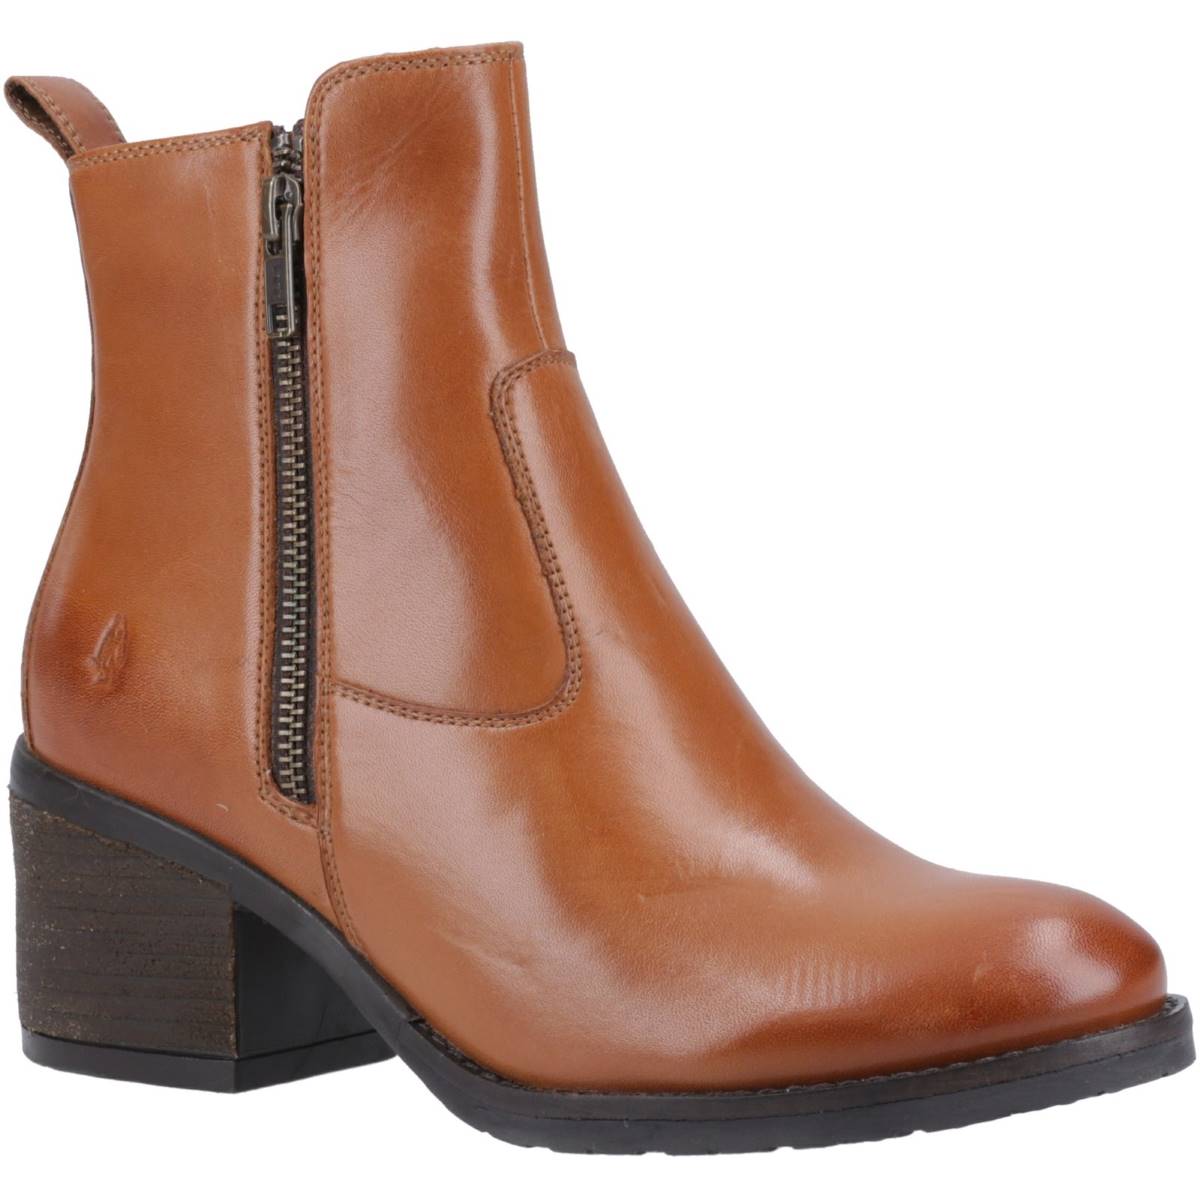 Hush Puppies Helena Tan Womens ankle boots HP-35680-70568 in a Plain Leather in Size 5